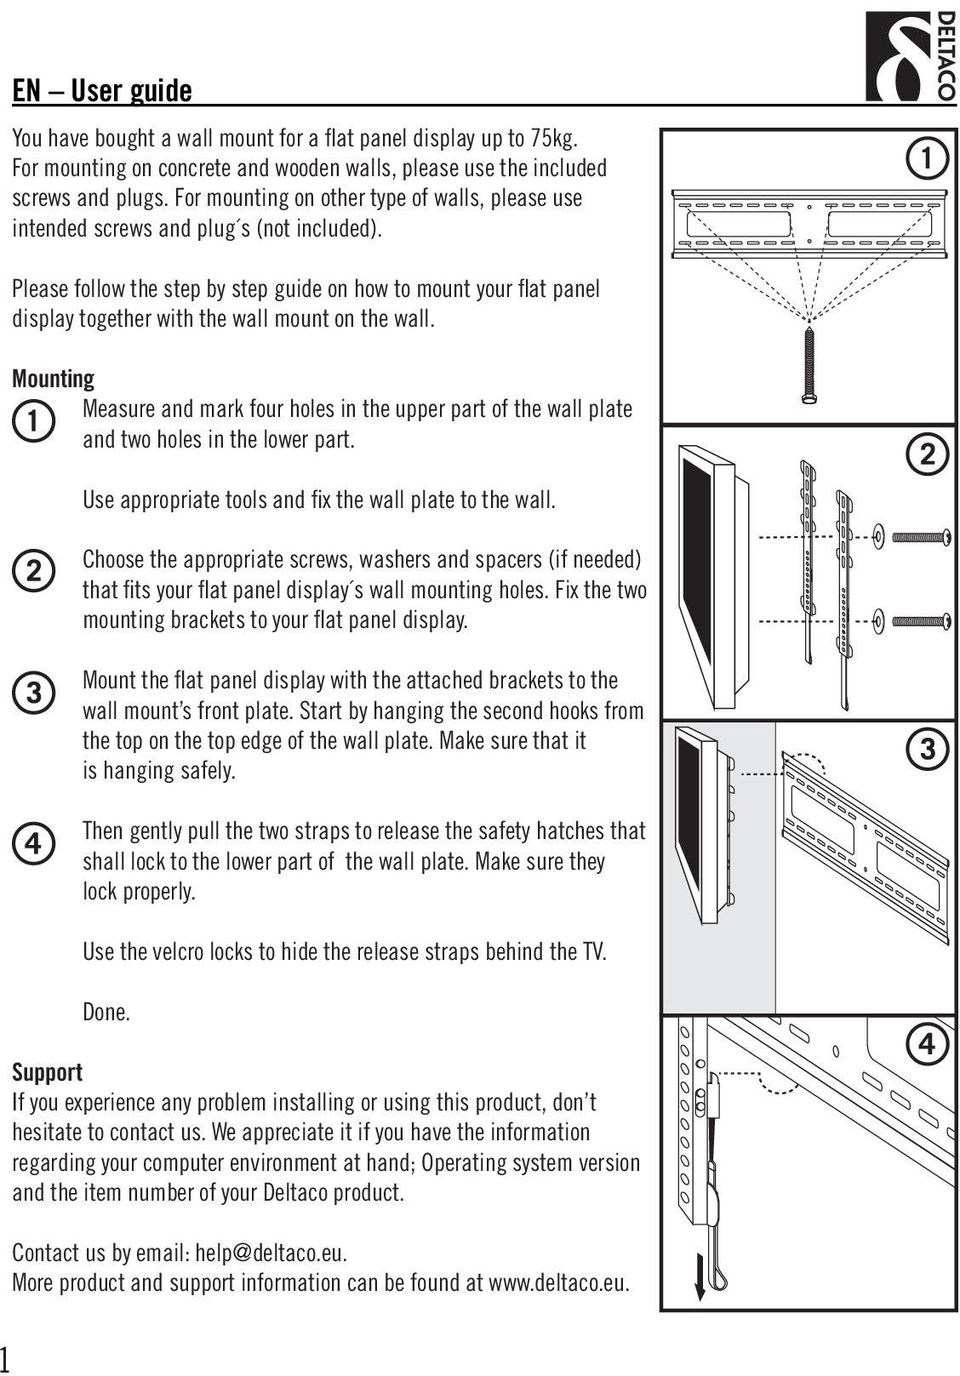 Please follow the step by step guide on how to mount your flat panel display together with the wall mount on the wall.